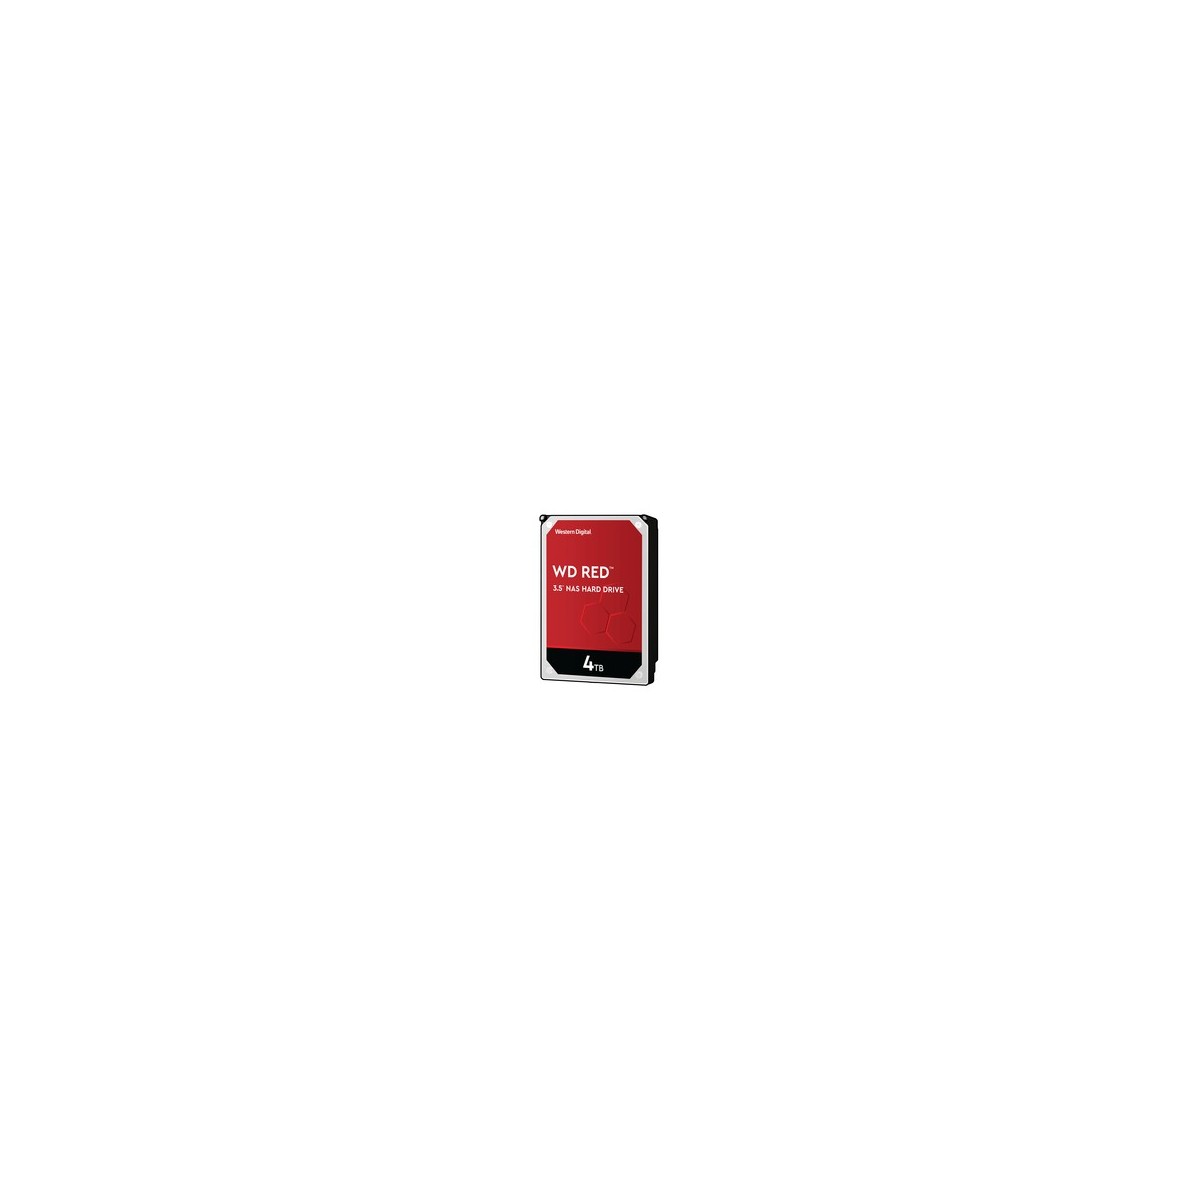 WD Red - 3.5 - 4000 GB - 5400 RPM